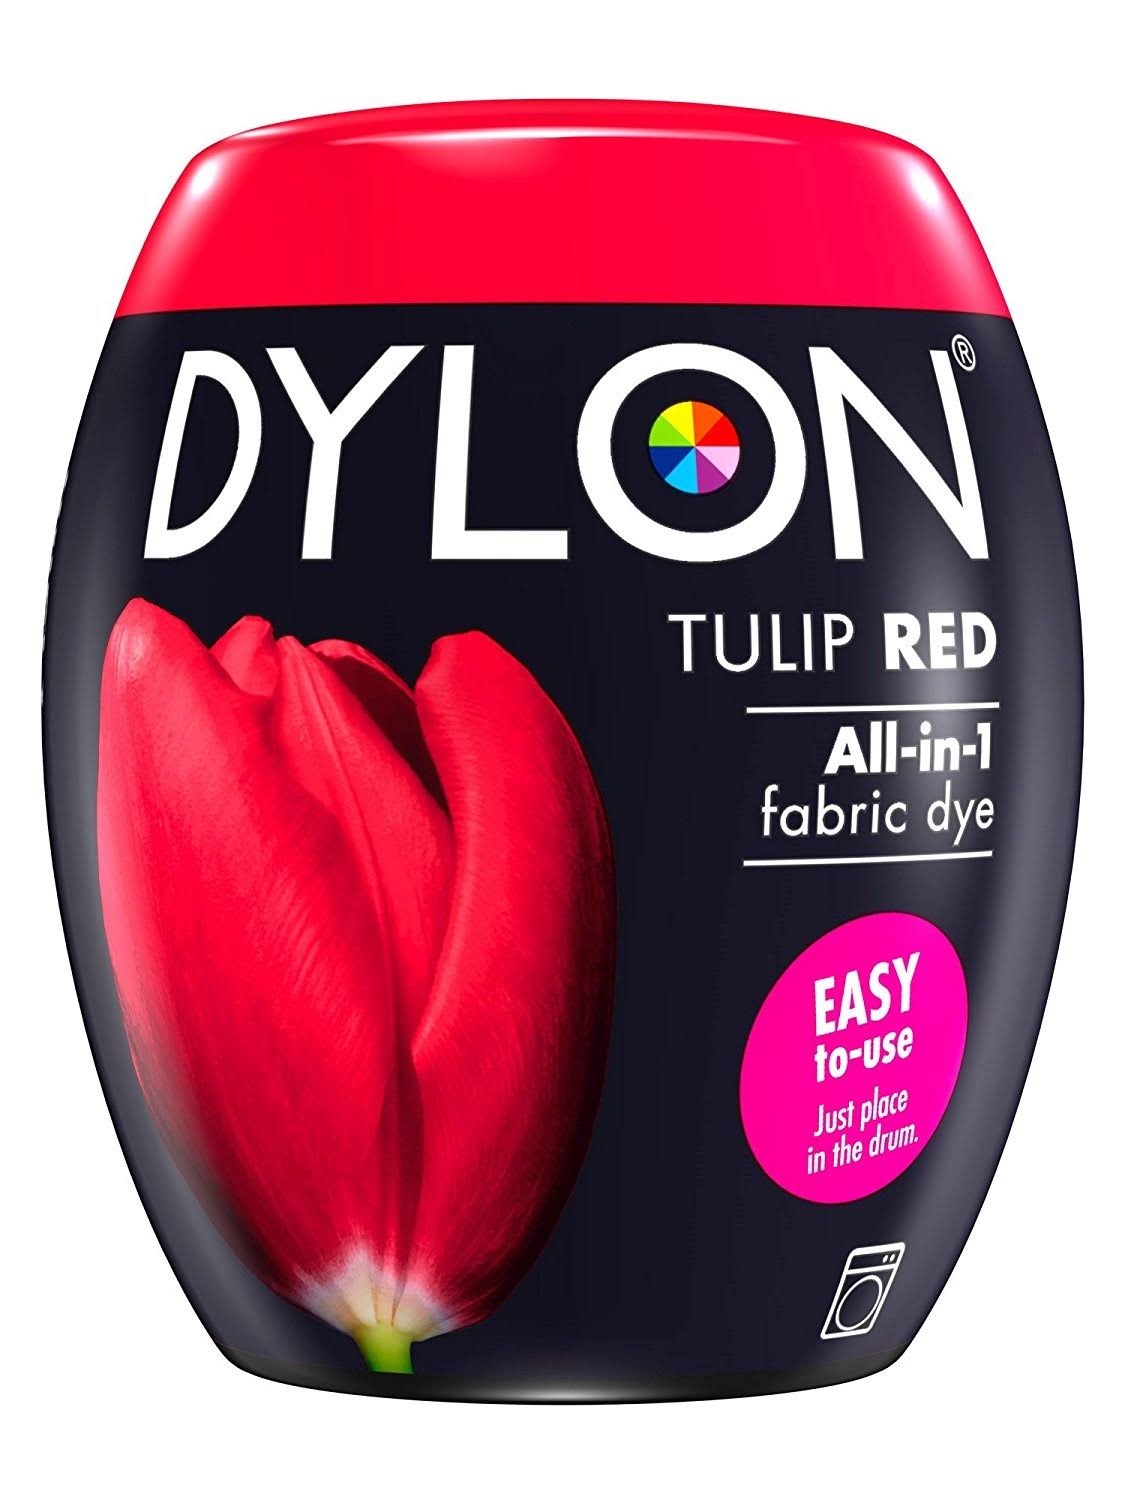 Dylon Tulip Red All in One Fabric Dye - Tulip Red, 350g